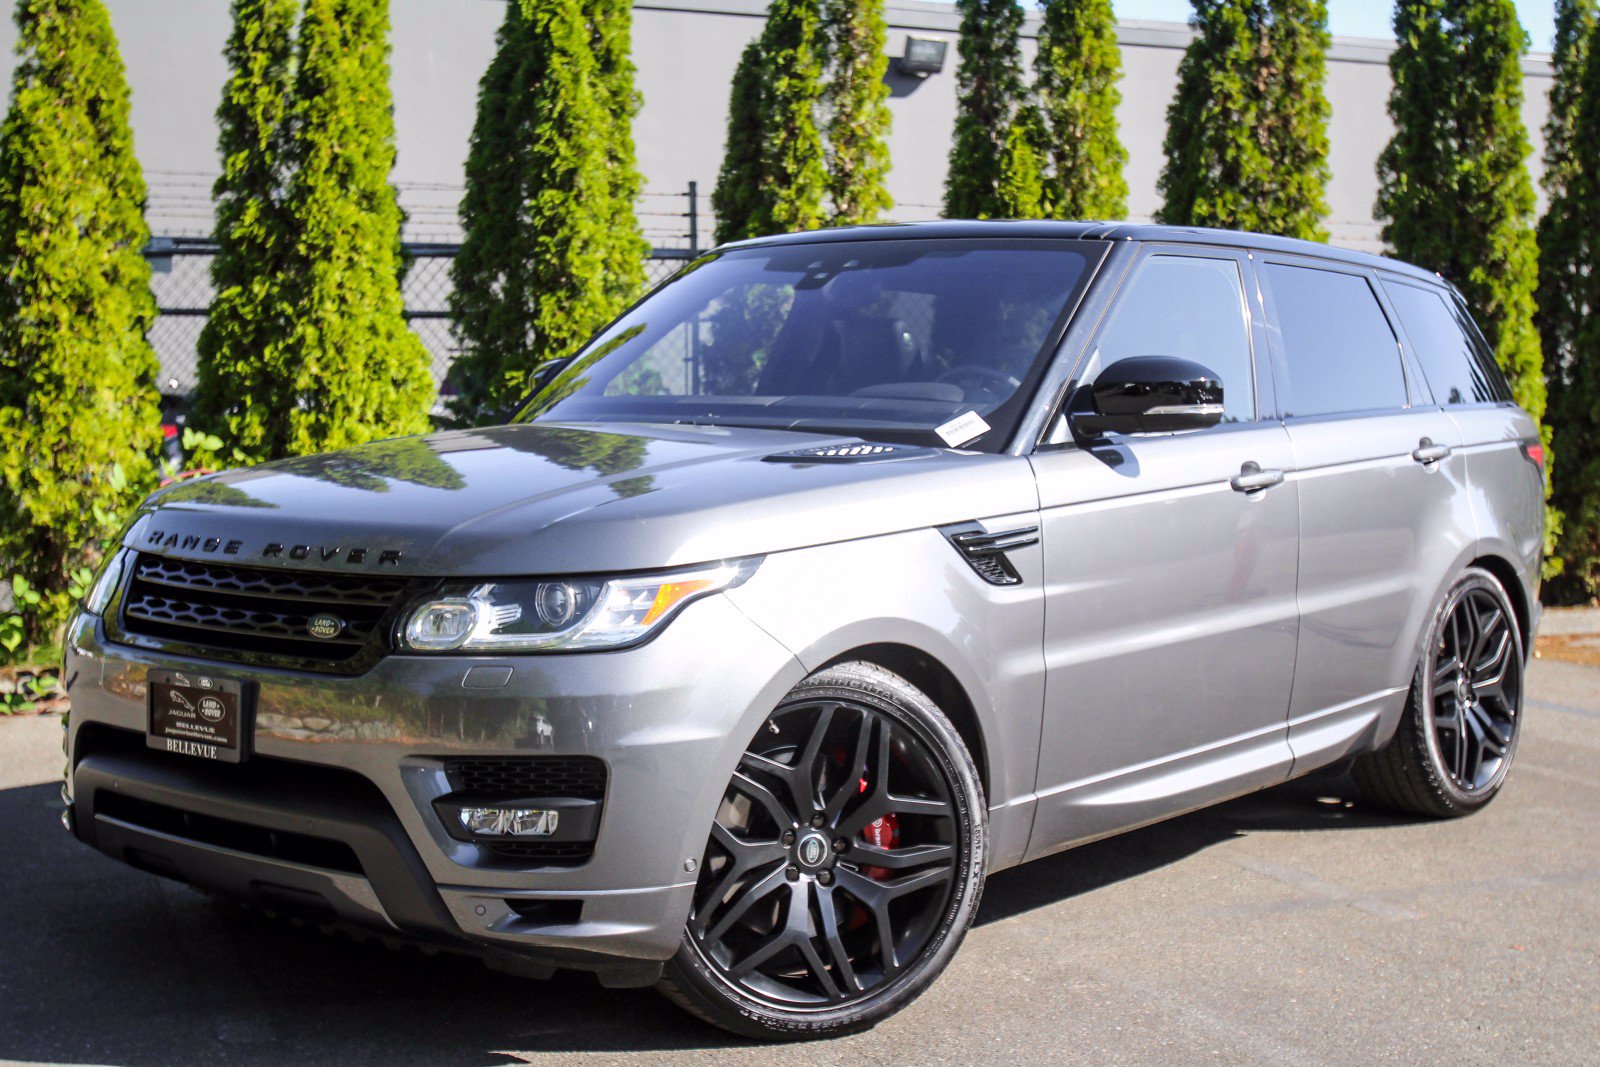 Pre Owned Range Rover Sport  - Every Aspect Of Range Rover Sport Has Been Designed With Precision To Create A Clean And Streamlined Exterior.